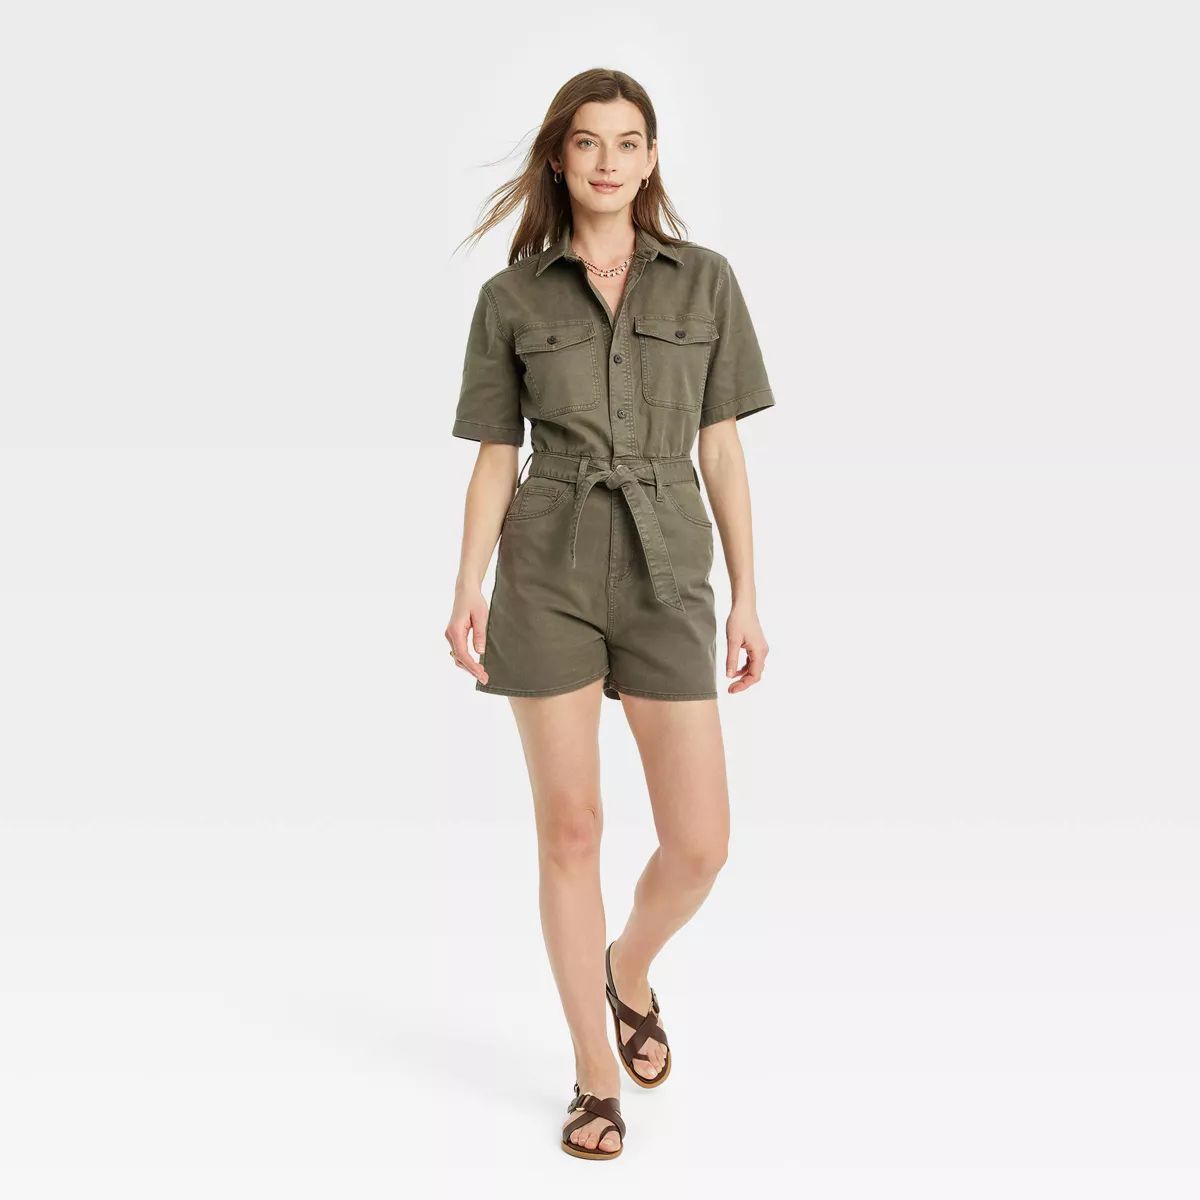 TargetClothing, Shoes & AccessoriesWomen’s ClothingJumpsuits & Rompers | Target